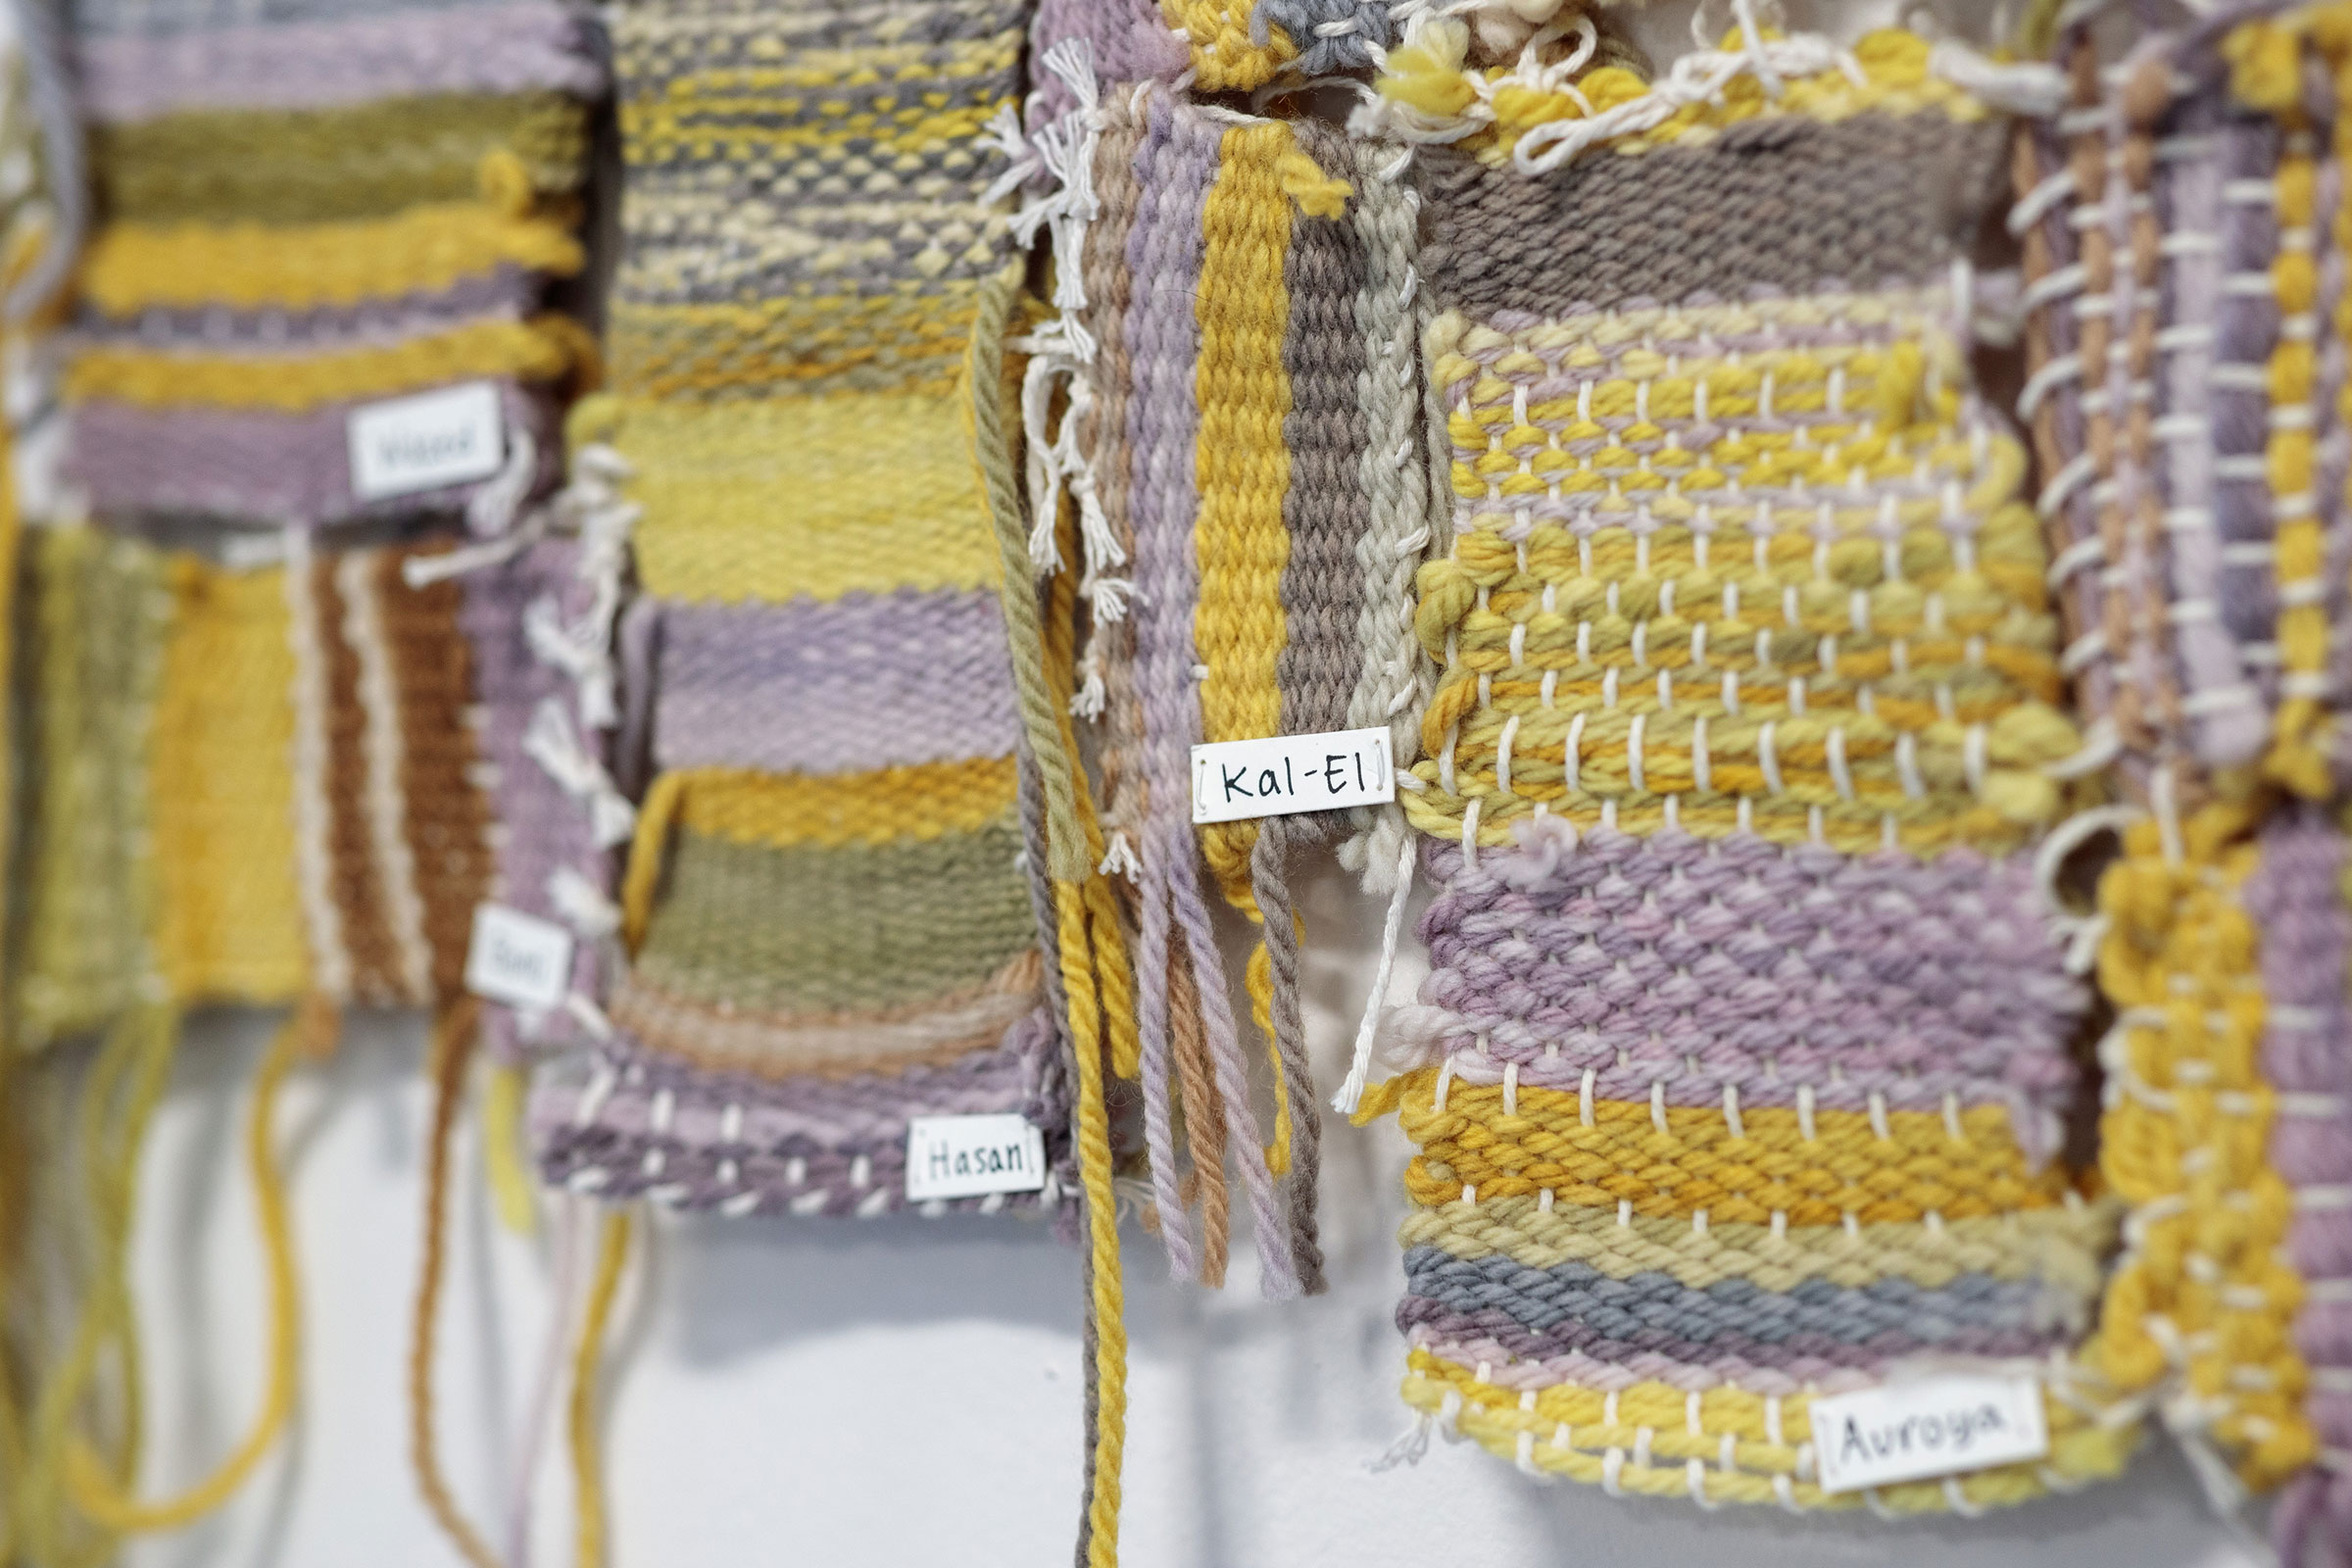 Weavings by the PS270 students (photo by Ron Hester Photography)